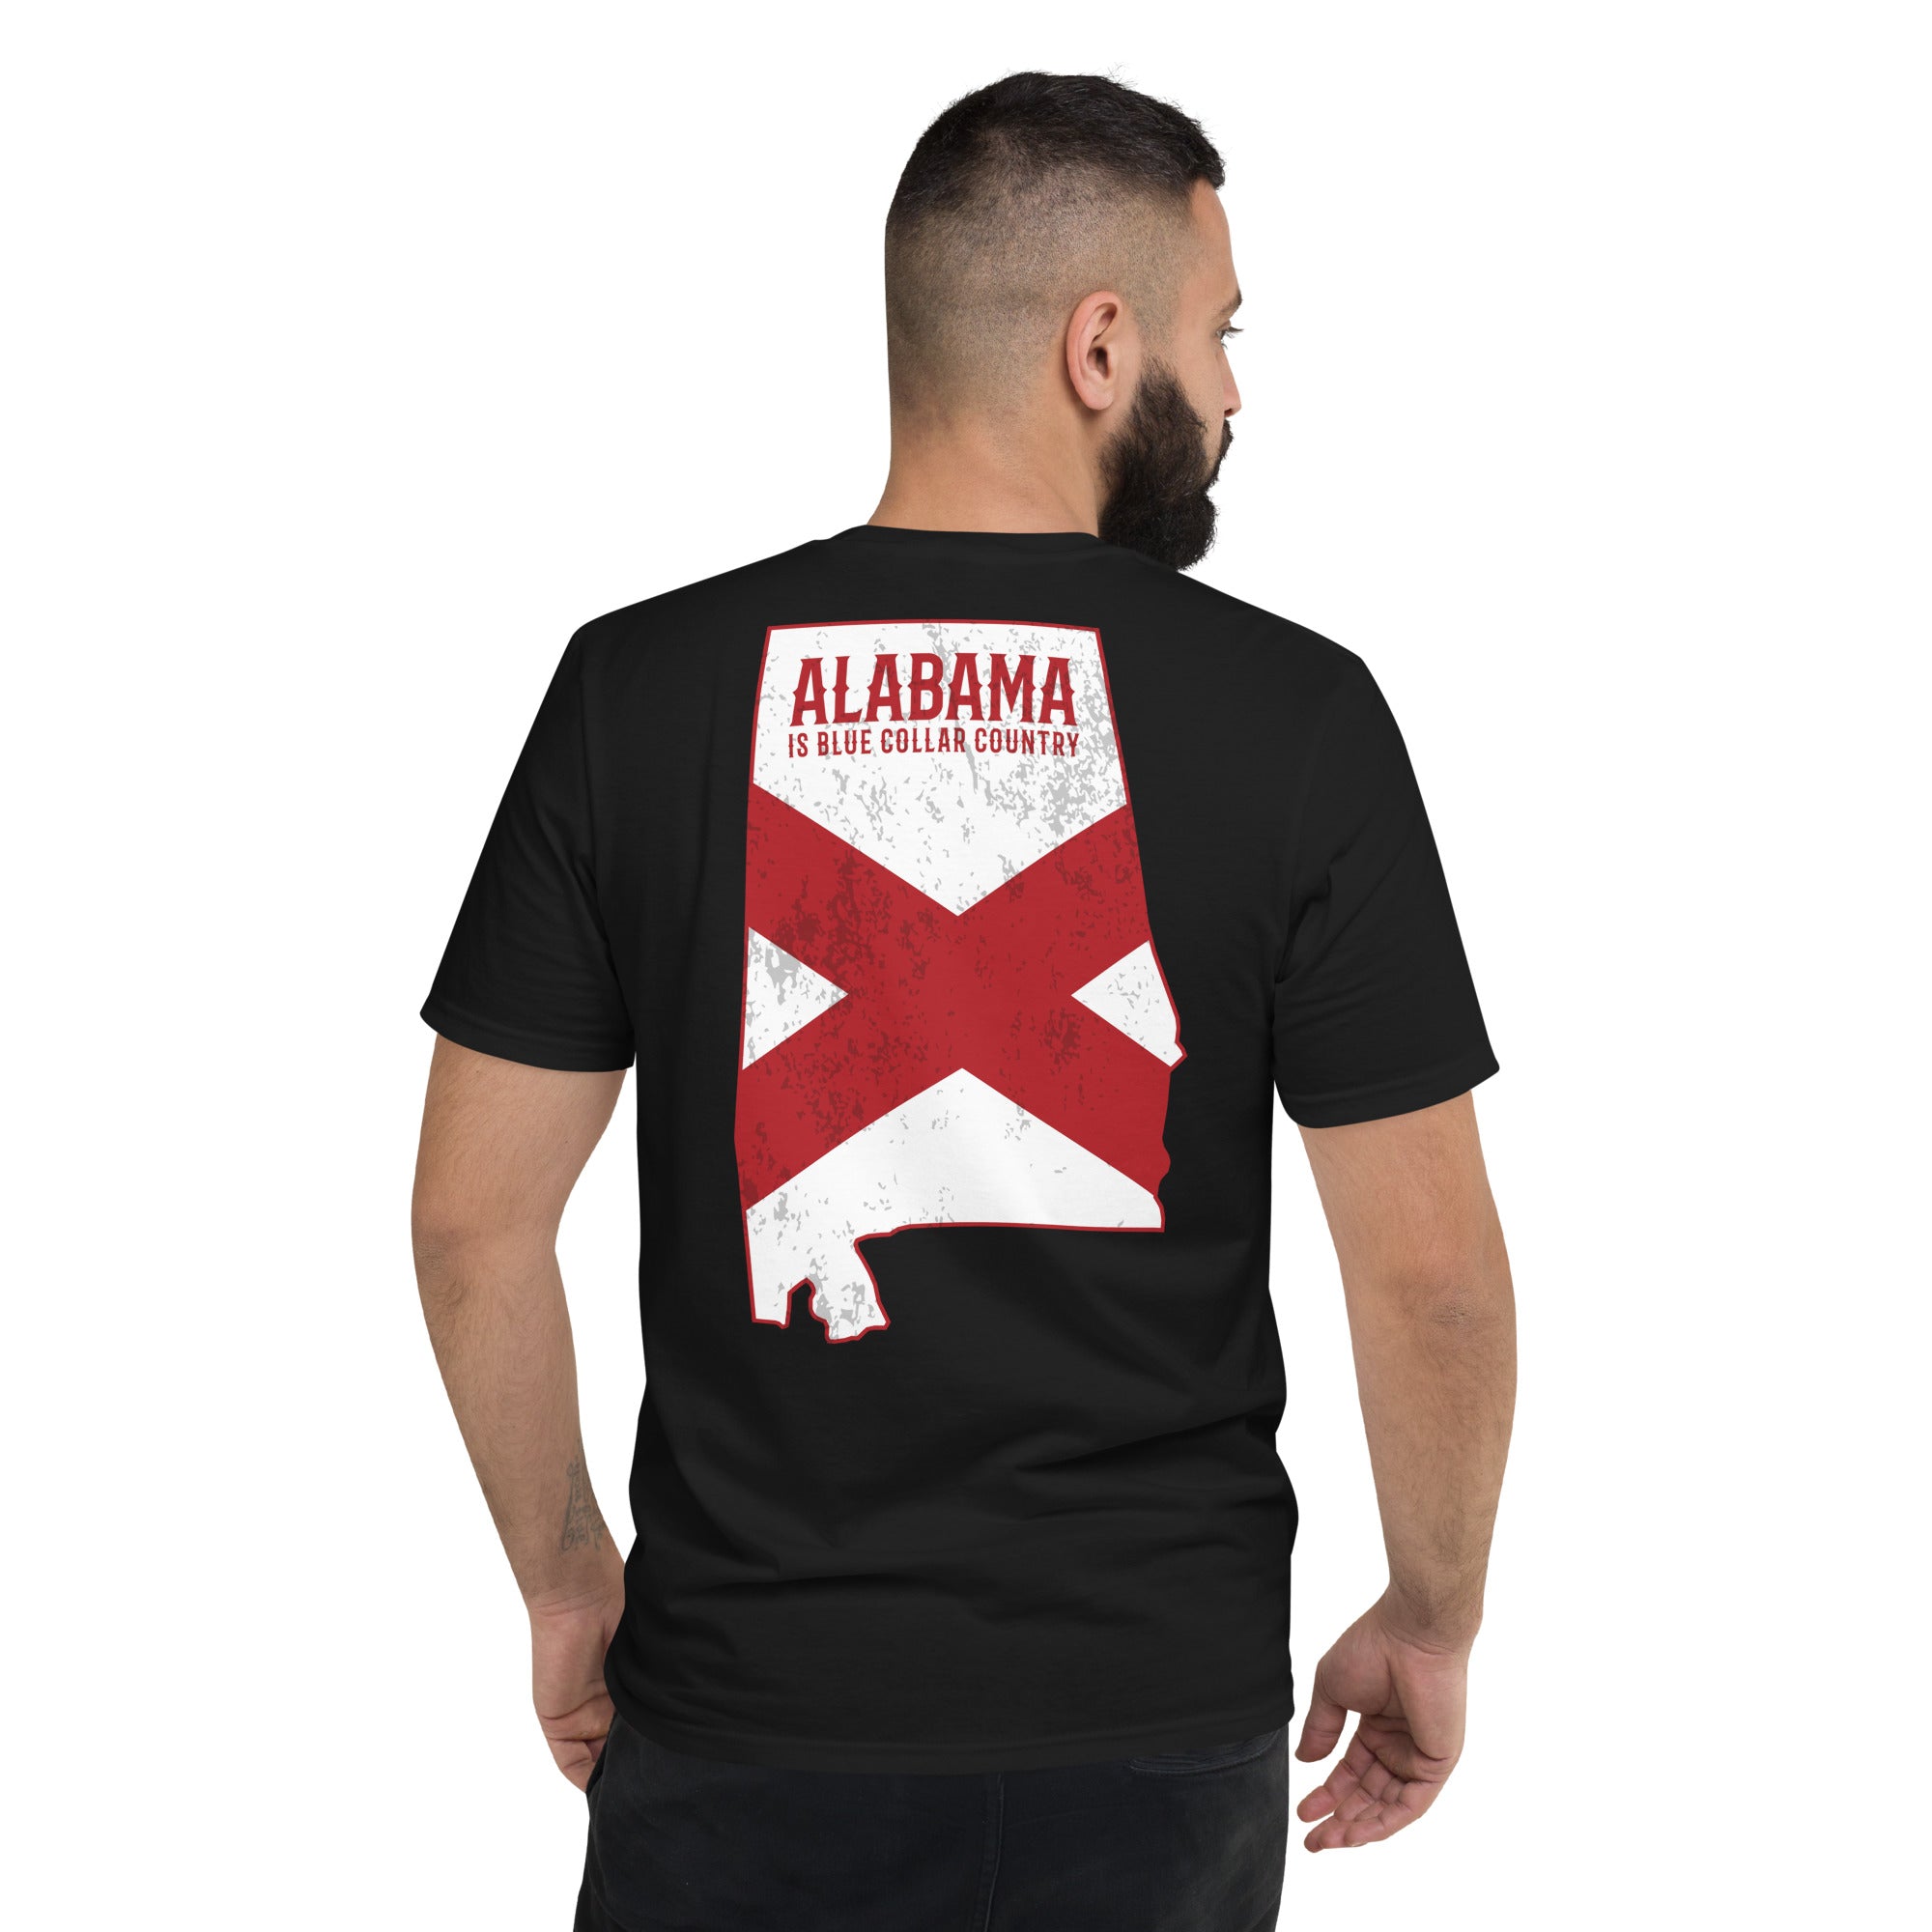 Alabama is Blue Collar Country  I  Short-Sleeve T-Shirt